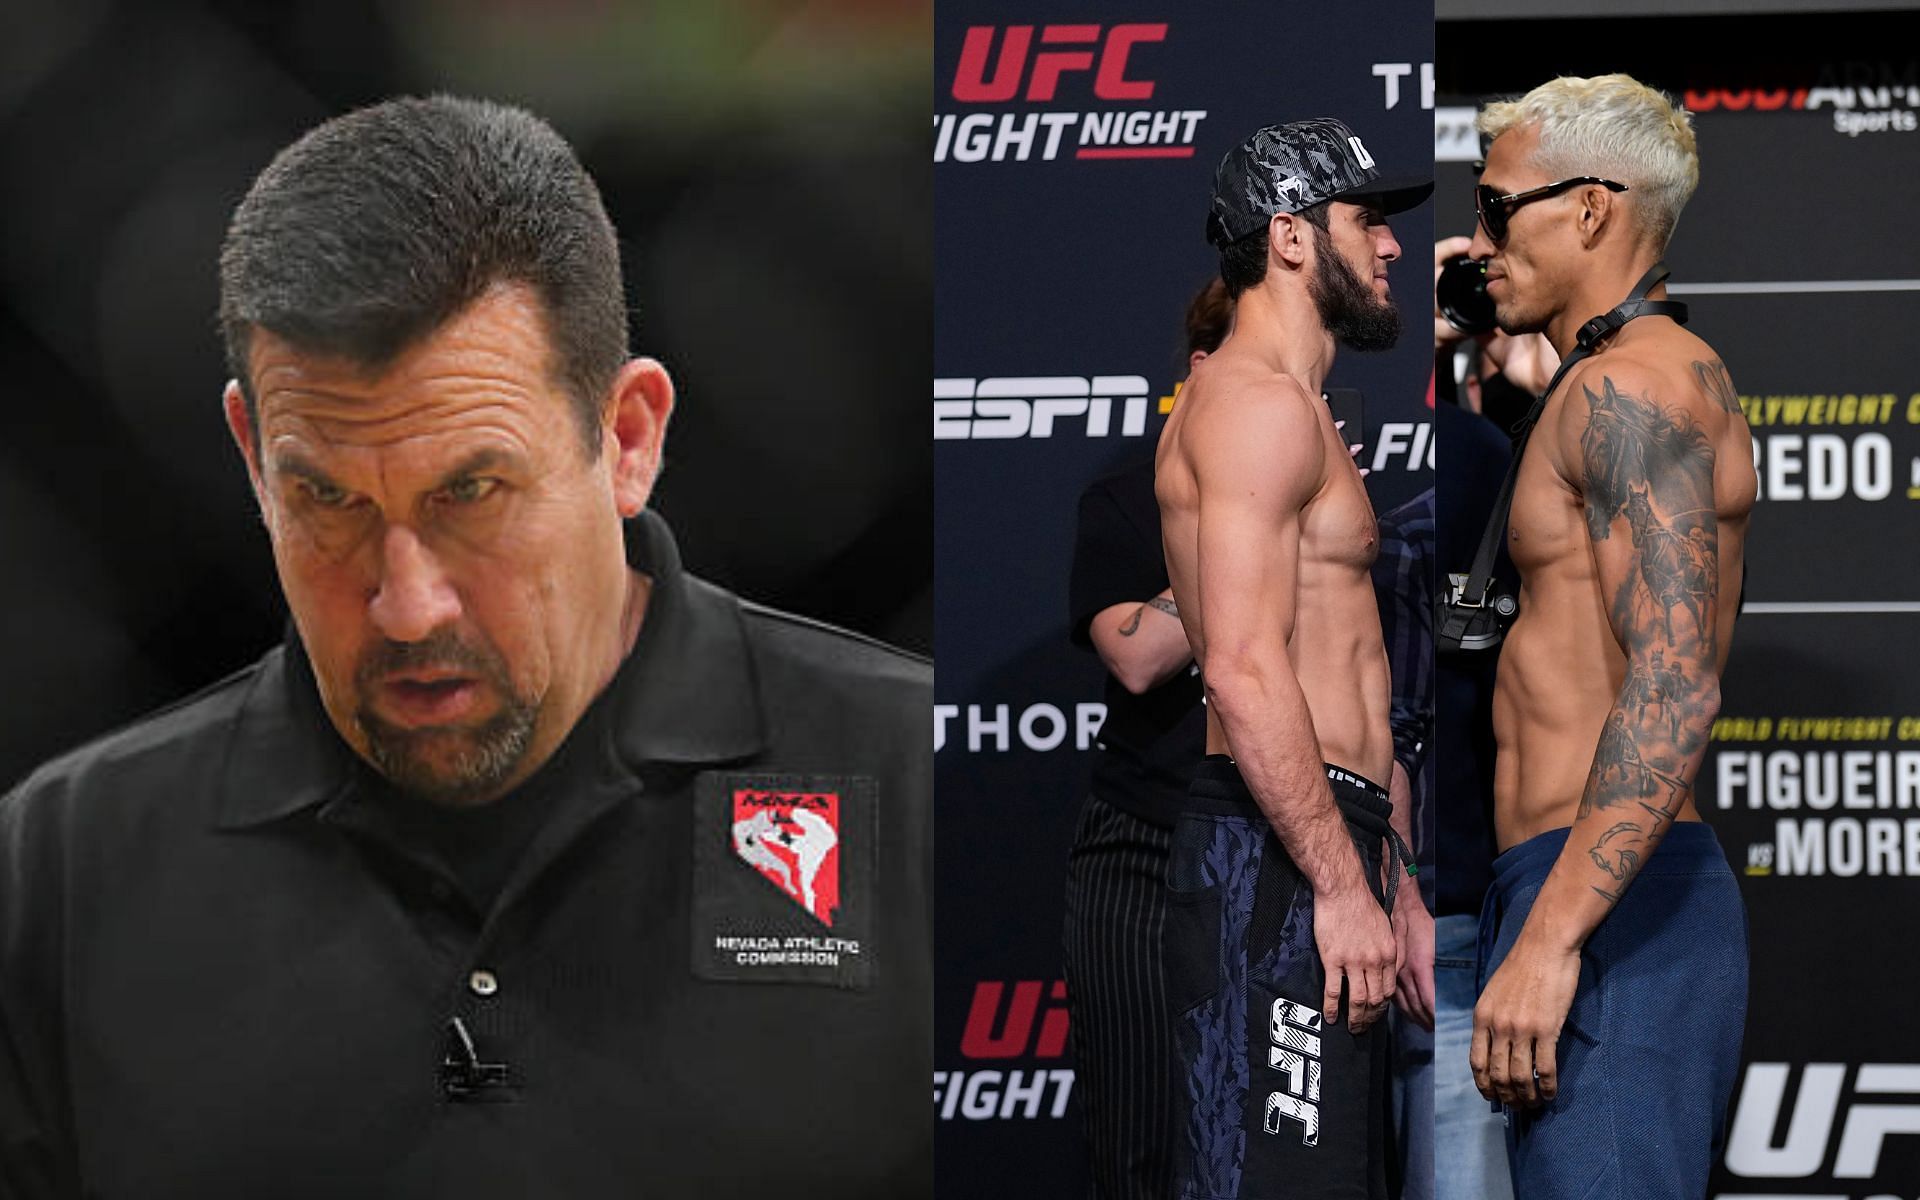 From left to right: John McCarthy, Islam Makhachev, and Charles Oliveira